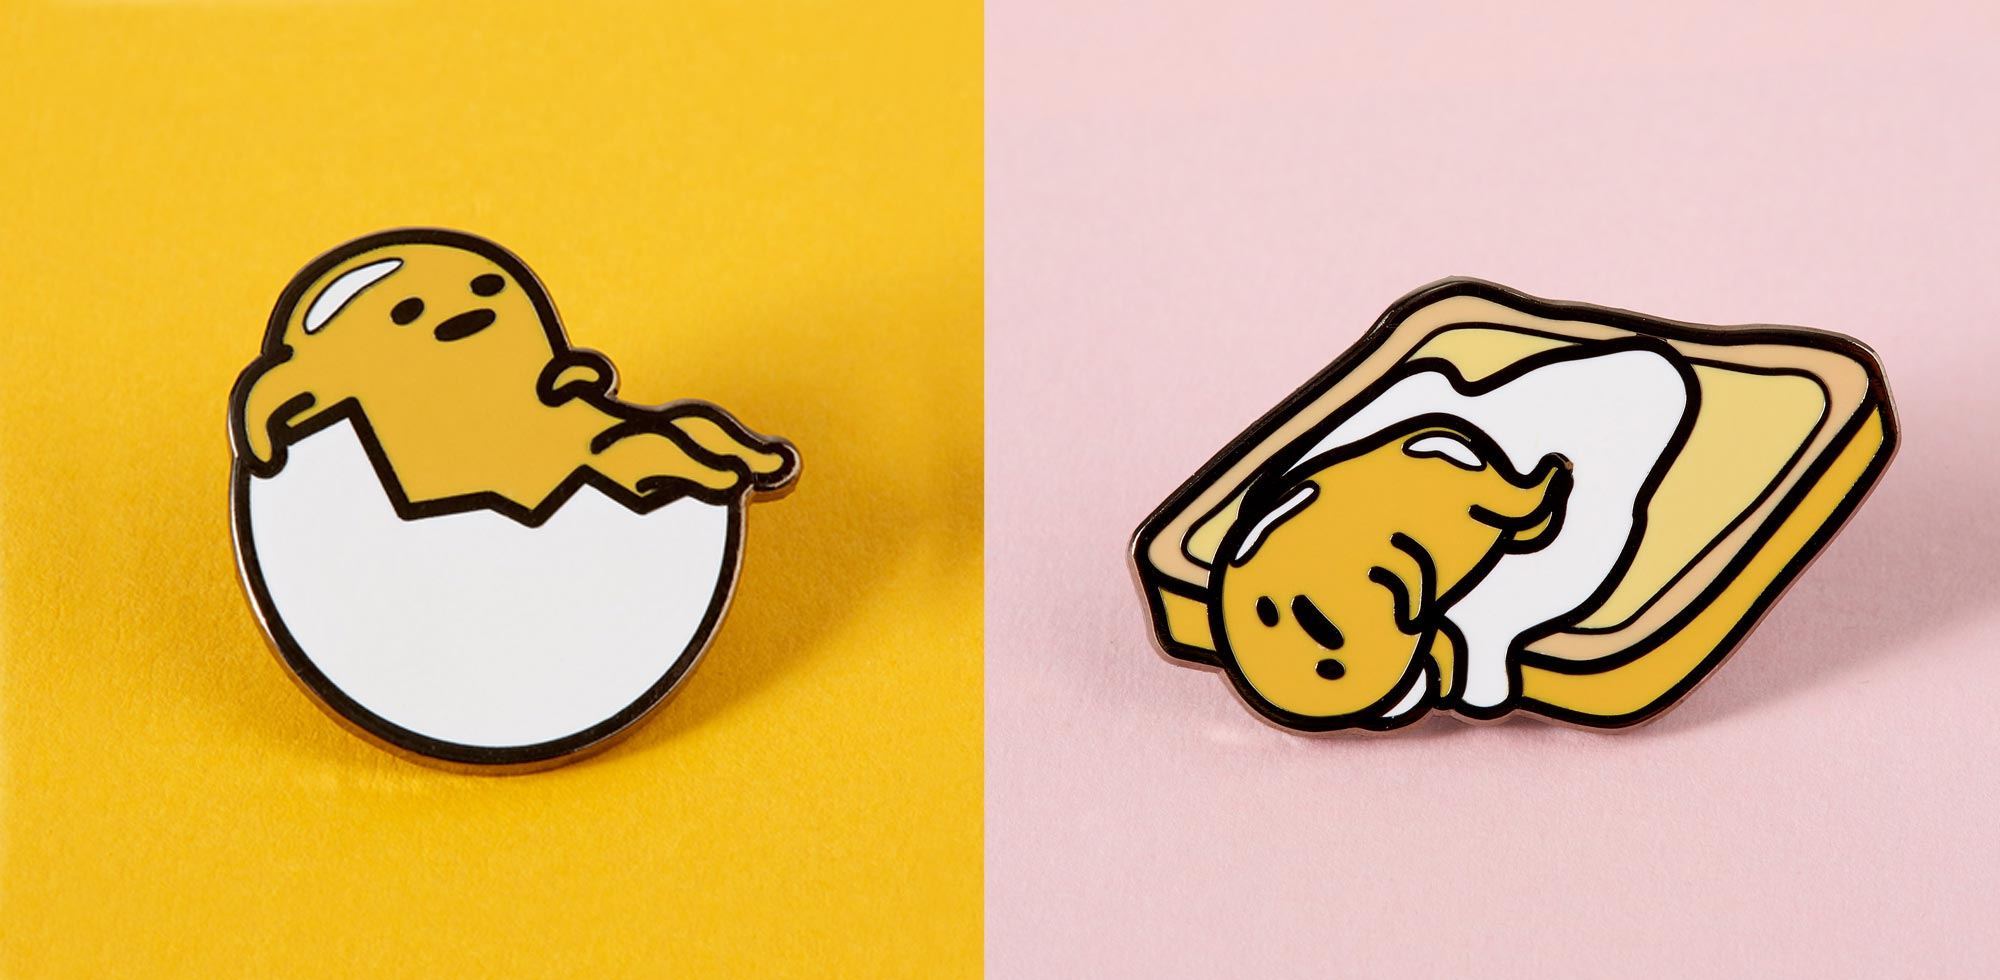 Two Gudetama enamel pins, one of him hatching from an egg and one of him sleeping on a piece of toast. - Gudetama